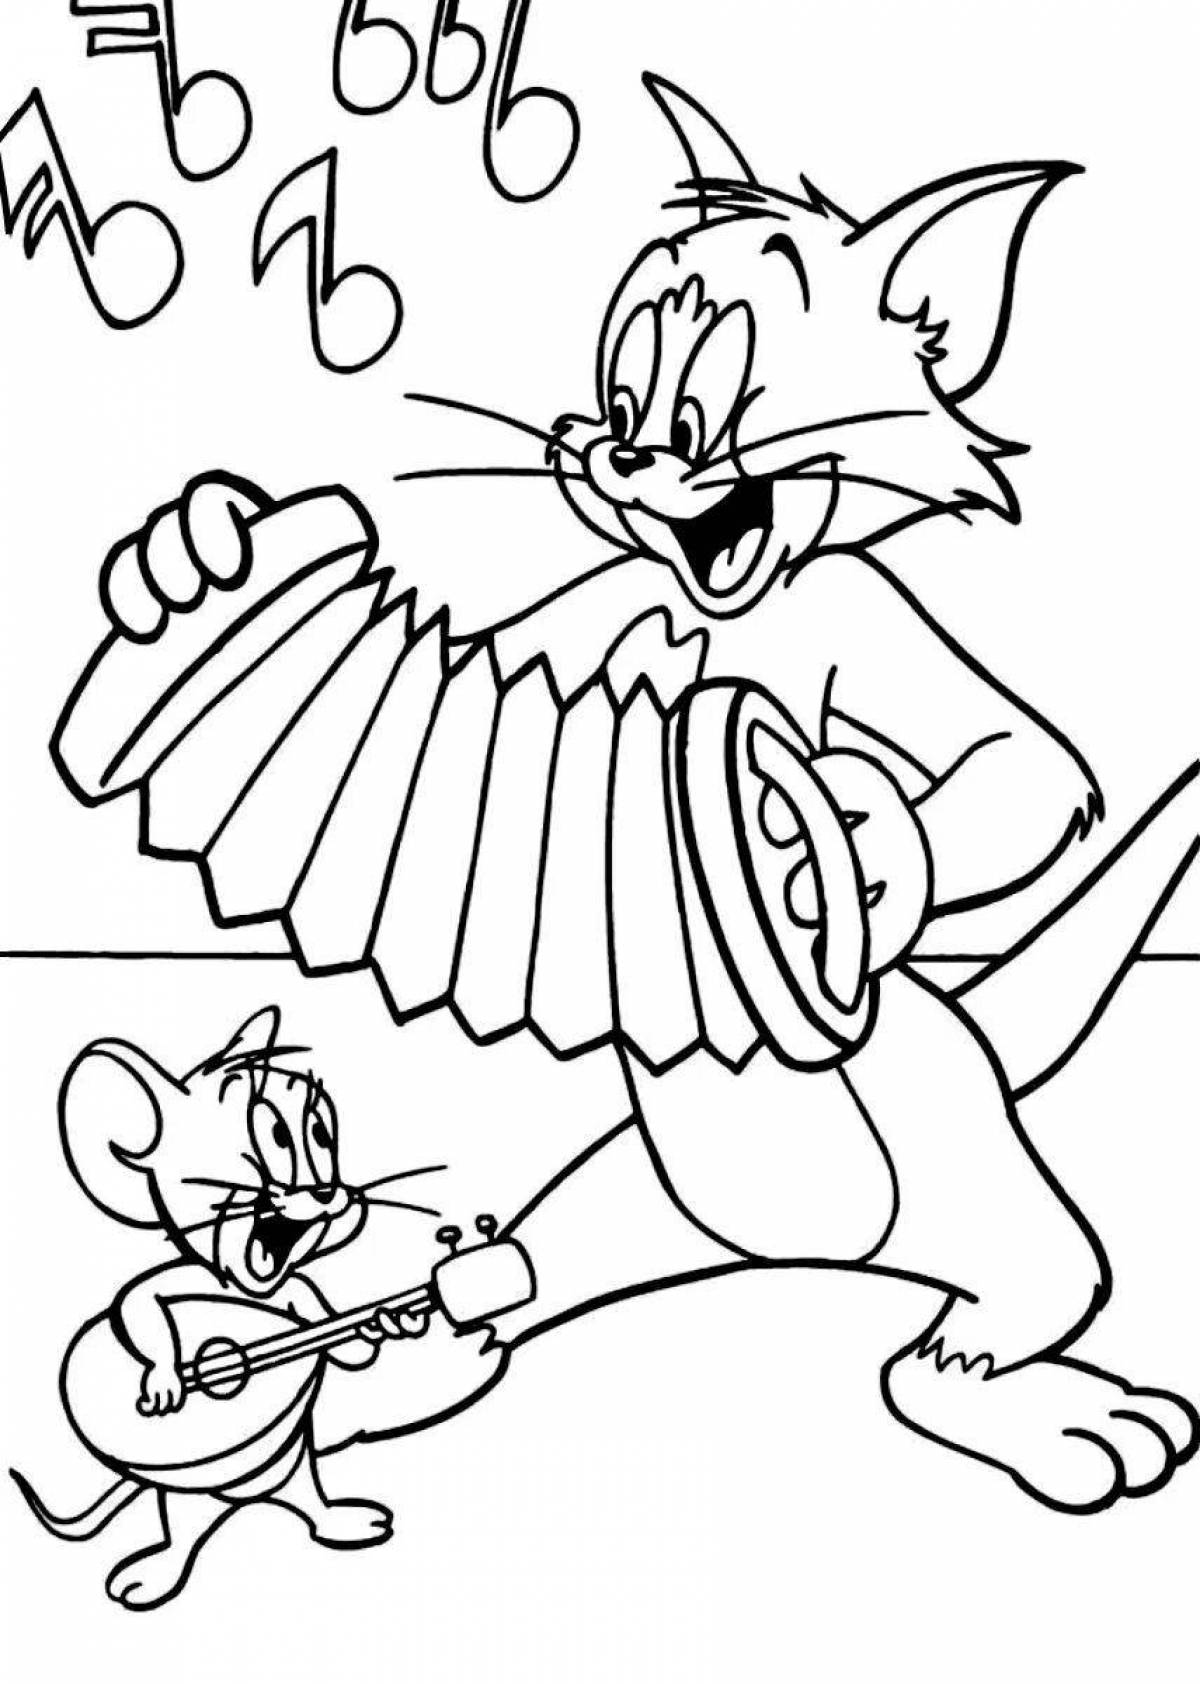 Fun tom and jerry coloring book